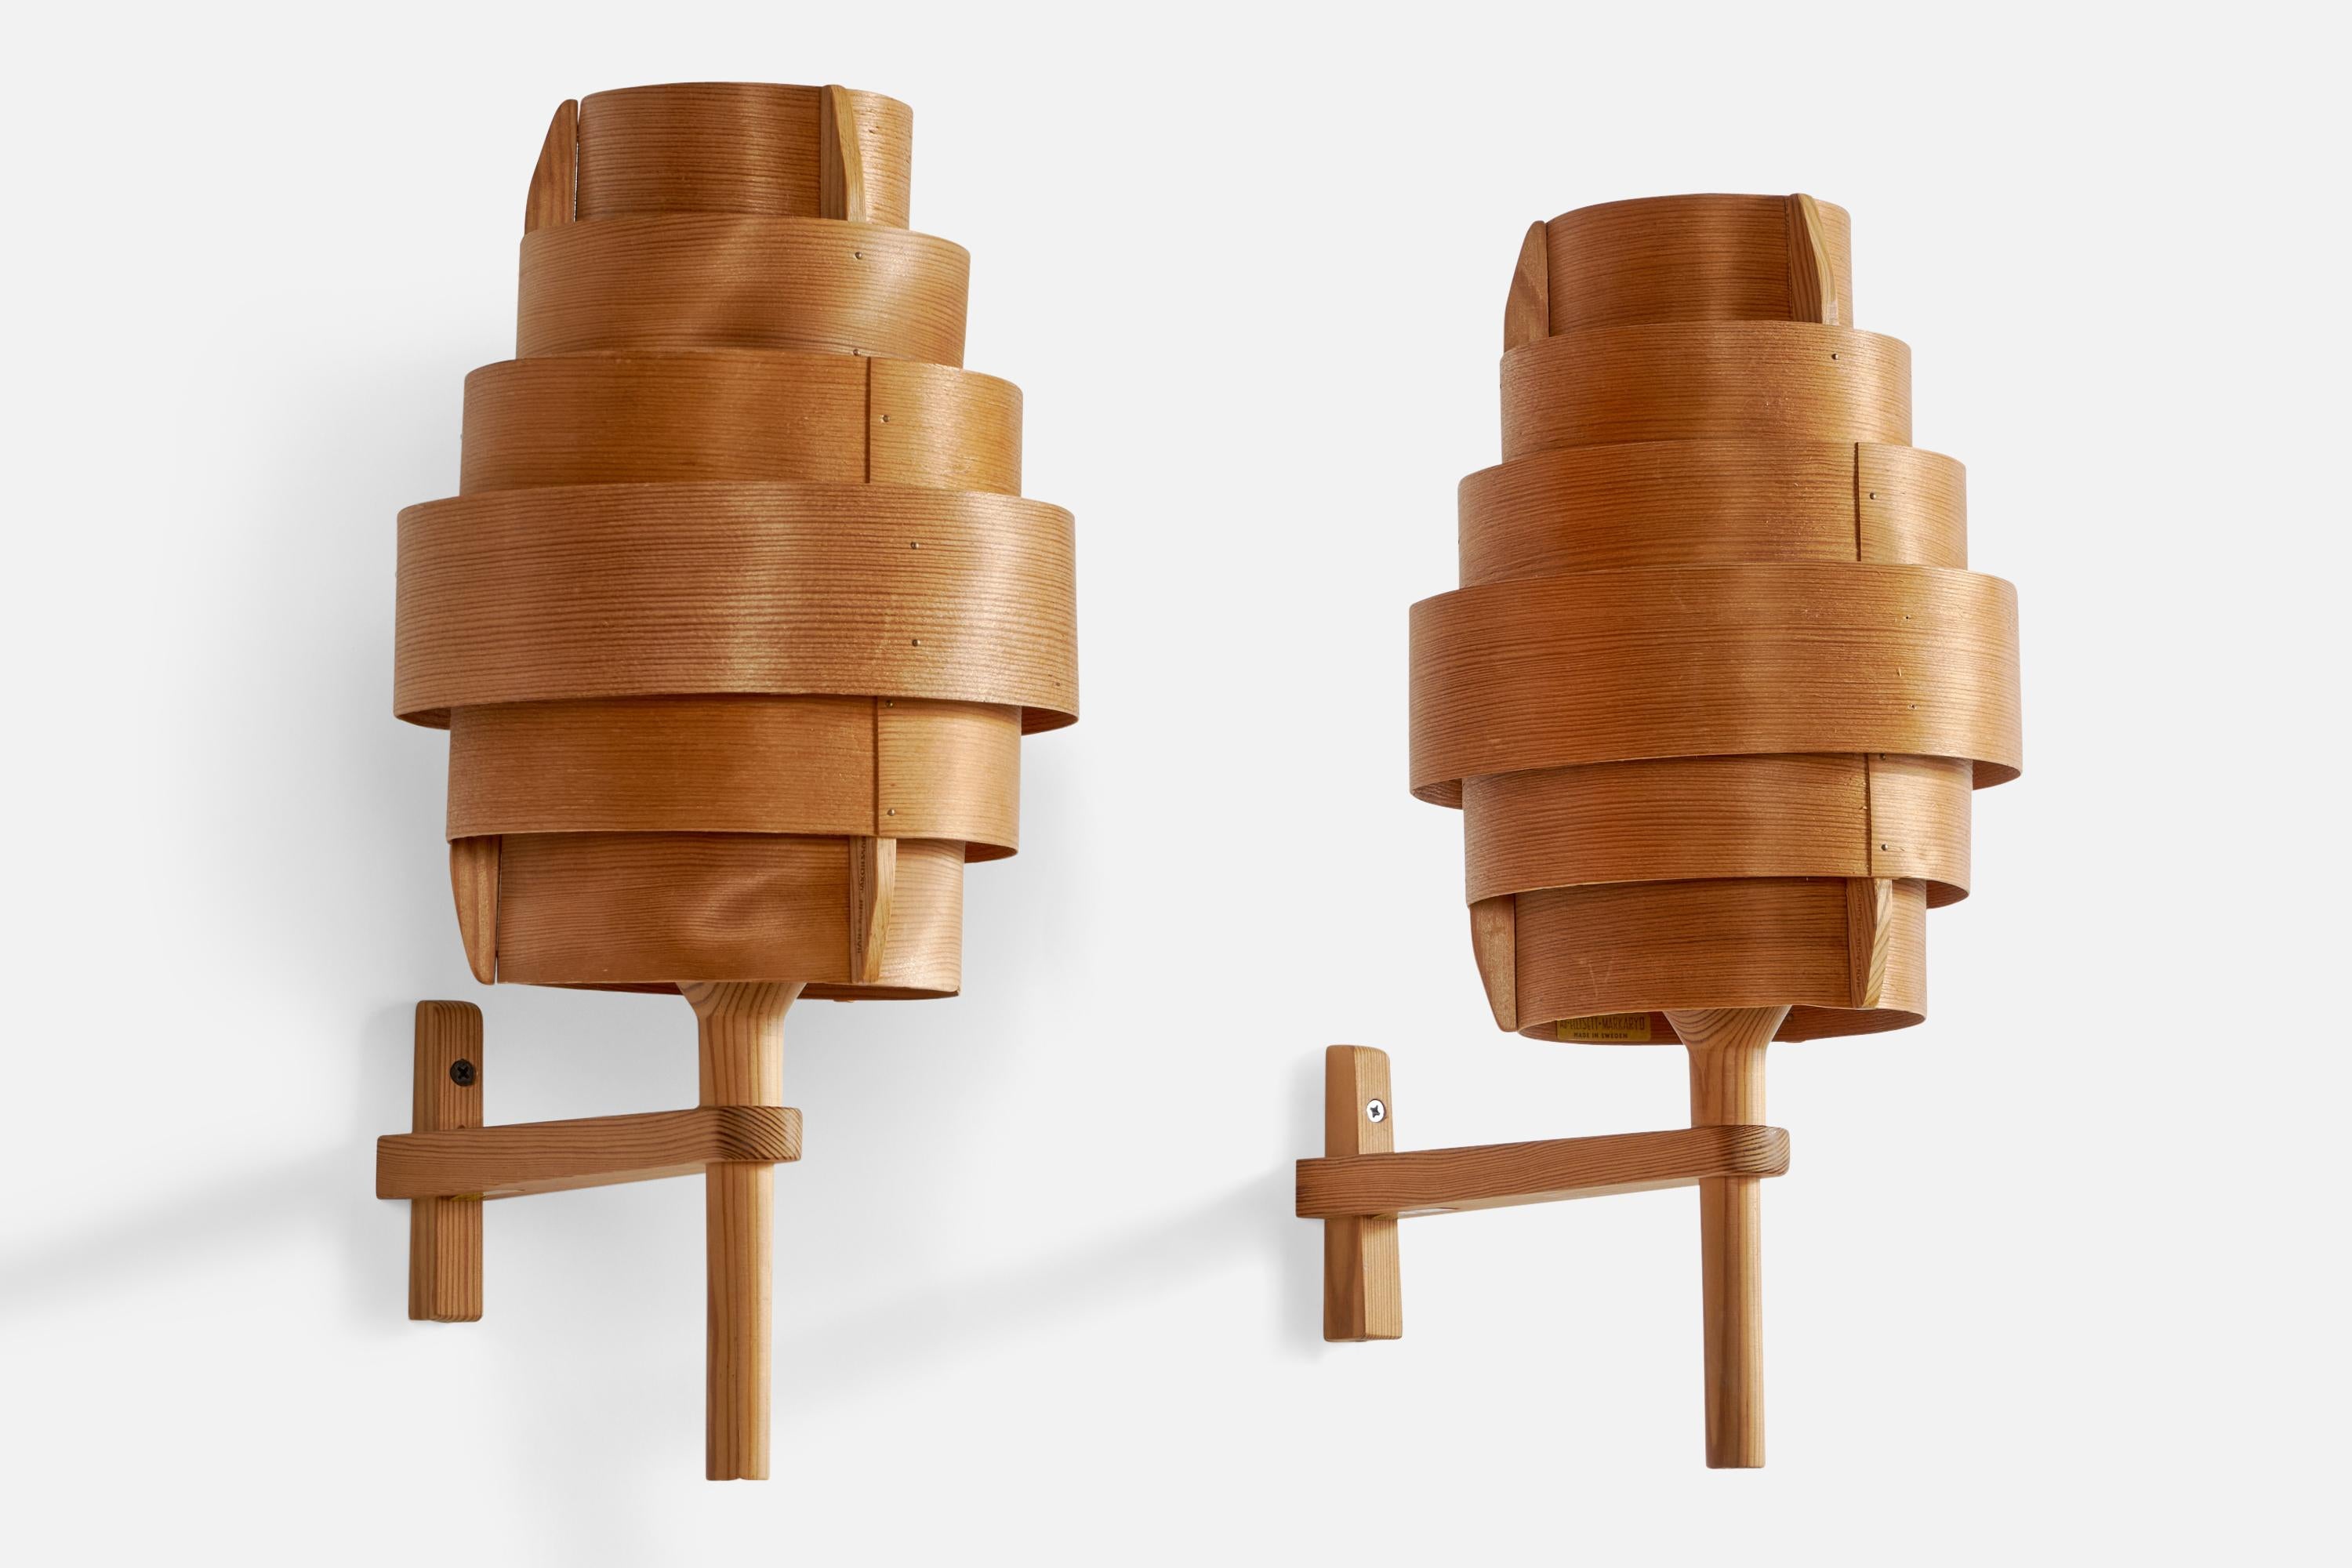 A pair of pine and moulded pine veneer wall lights designed and produced by Hans-Agne Jakobsson, Sweden, 1970s.

Overall Dimensions (inches): 15.8” H x 7.5” W x 11.75” D
Back Plate Dimensions (inches): 4” H x 1.65” W x 0.9” D
Bulb Specifications: